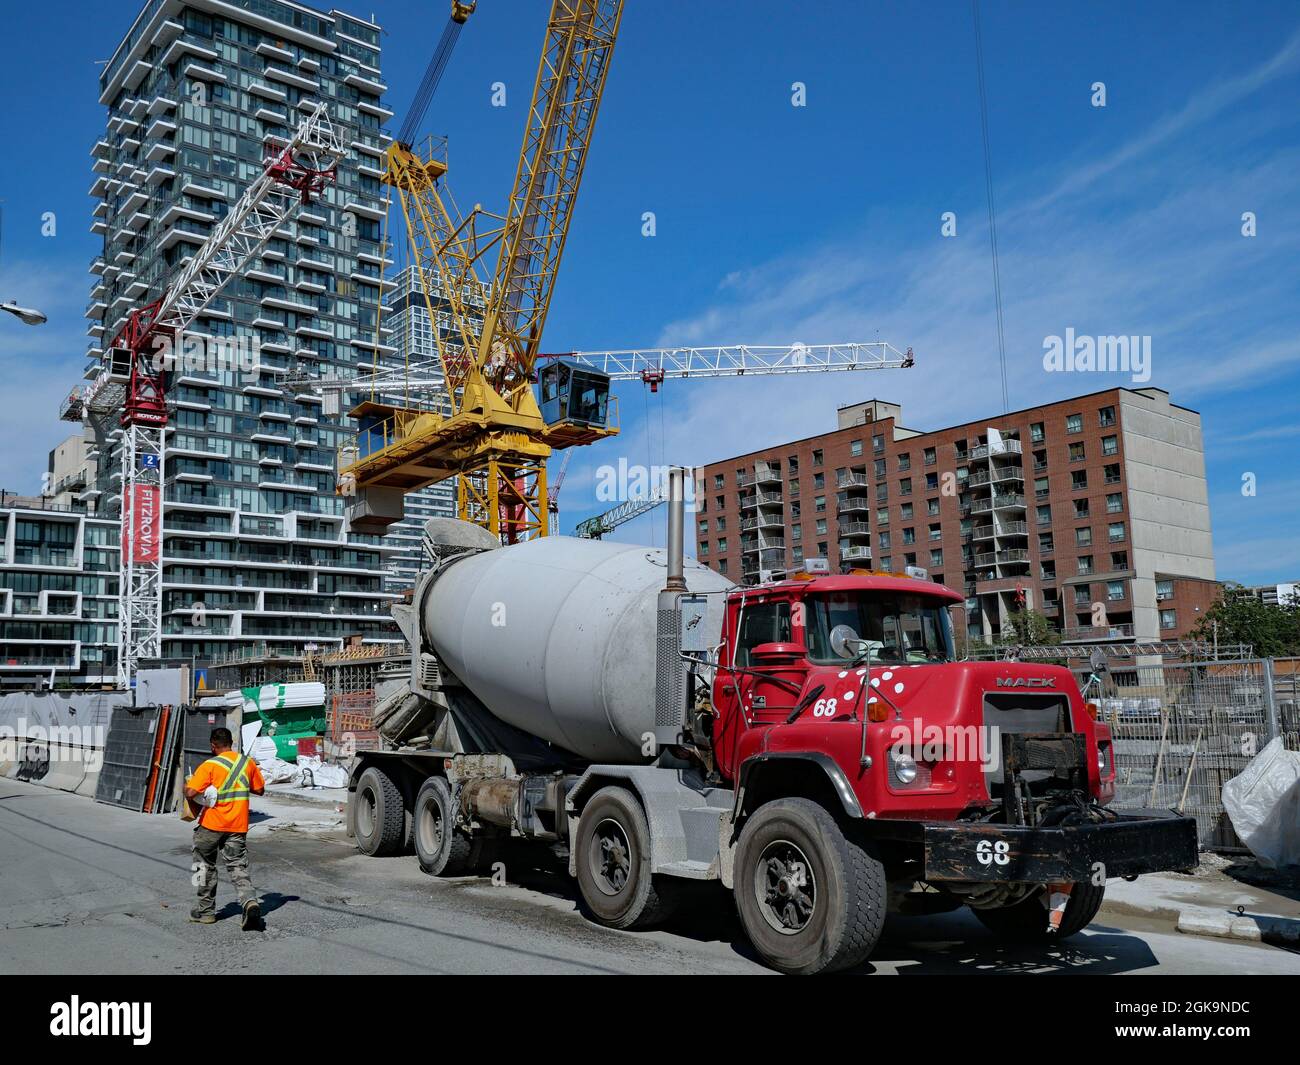 Toronto, Canada - September 13, 2021: A cement truck delivers material for the construction of a new downtown condominium apartment building. Stock Photo